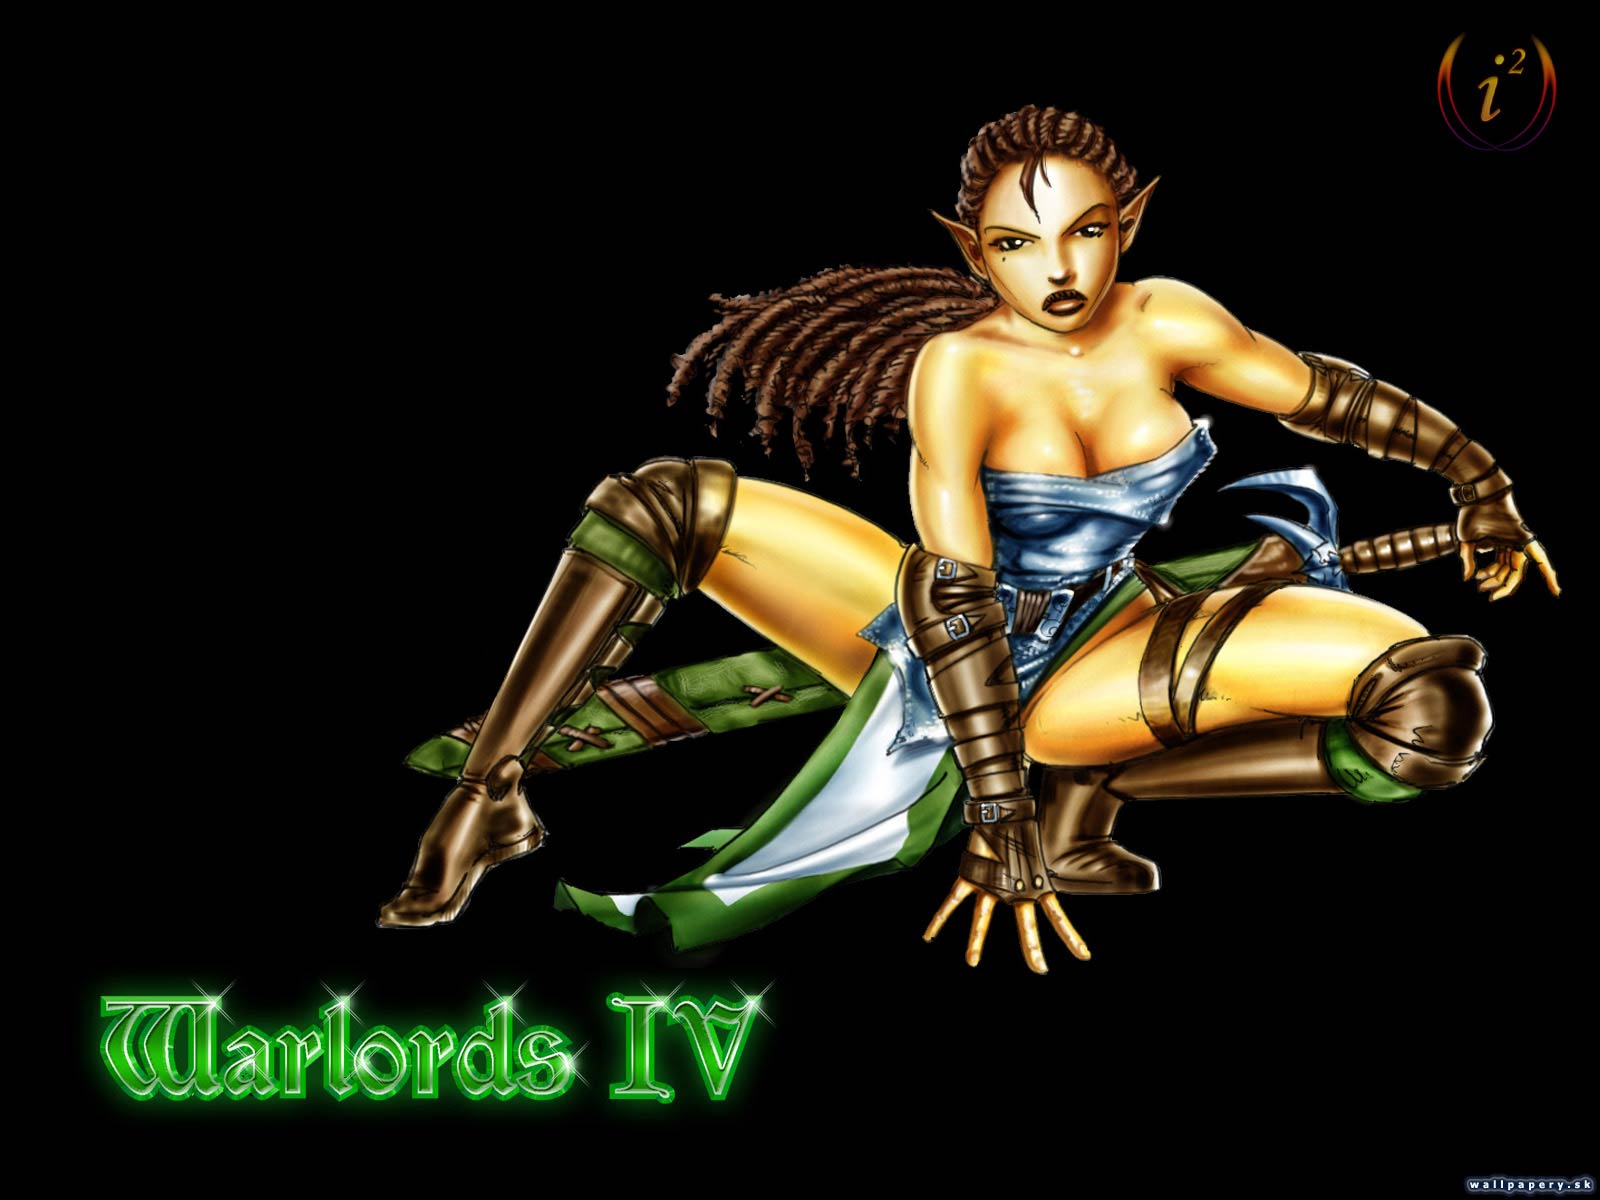 Warlords 4: Heroes of Etheria - wallpaper 4